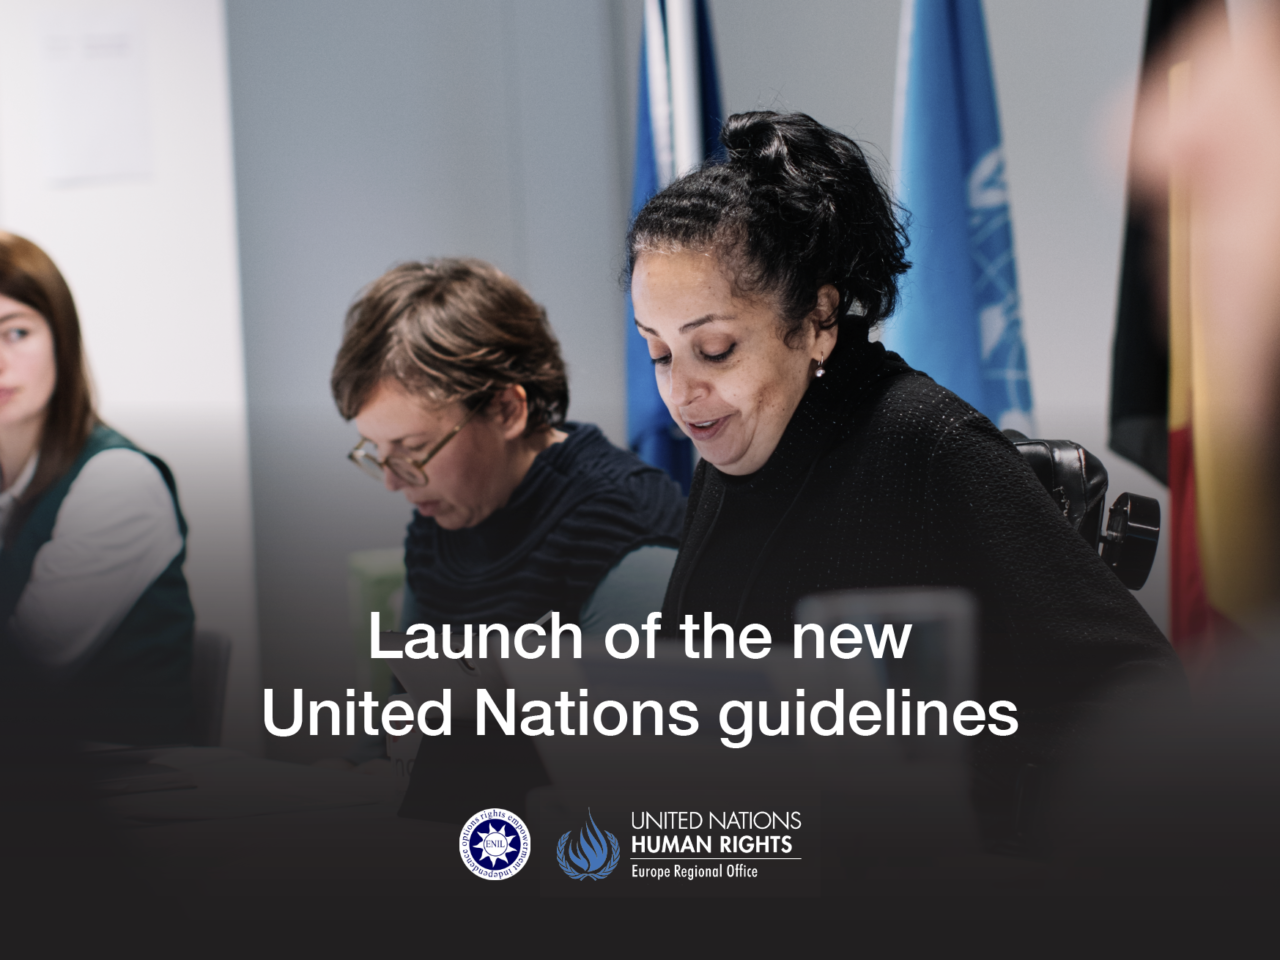 Launch of new UN guidelines in Brussels